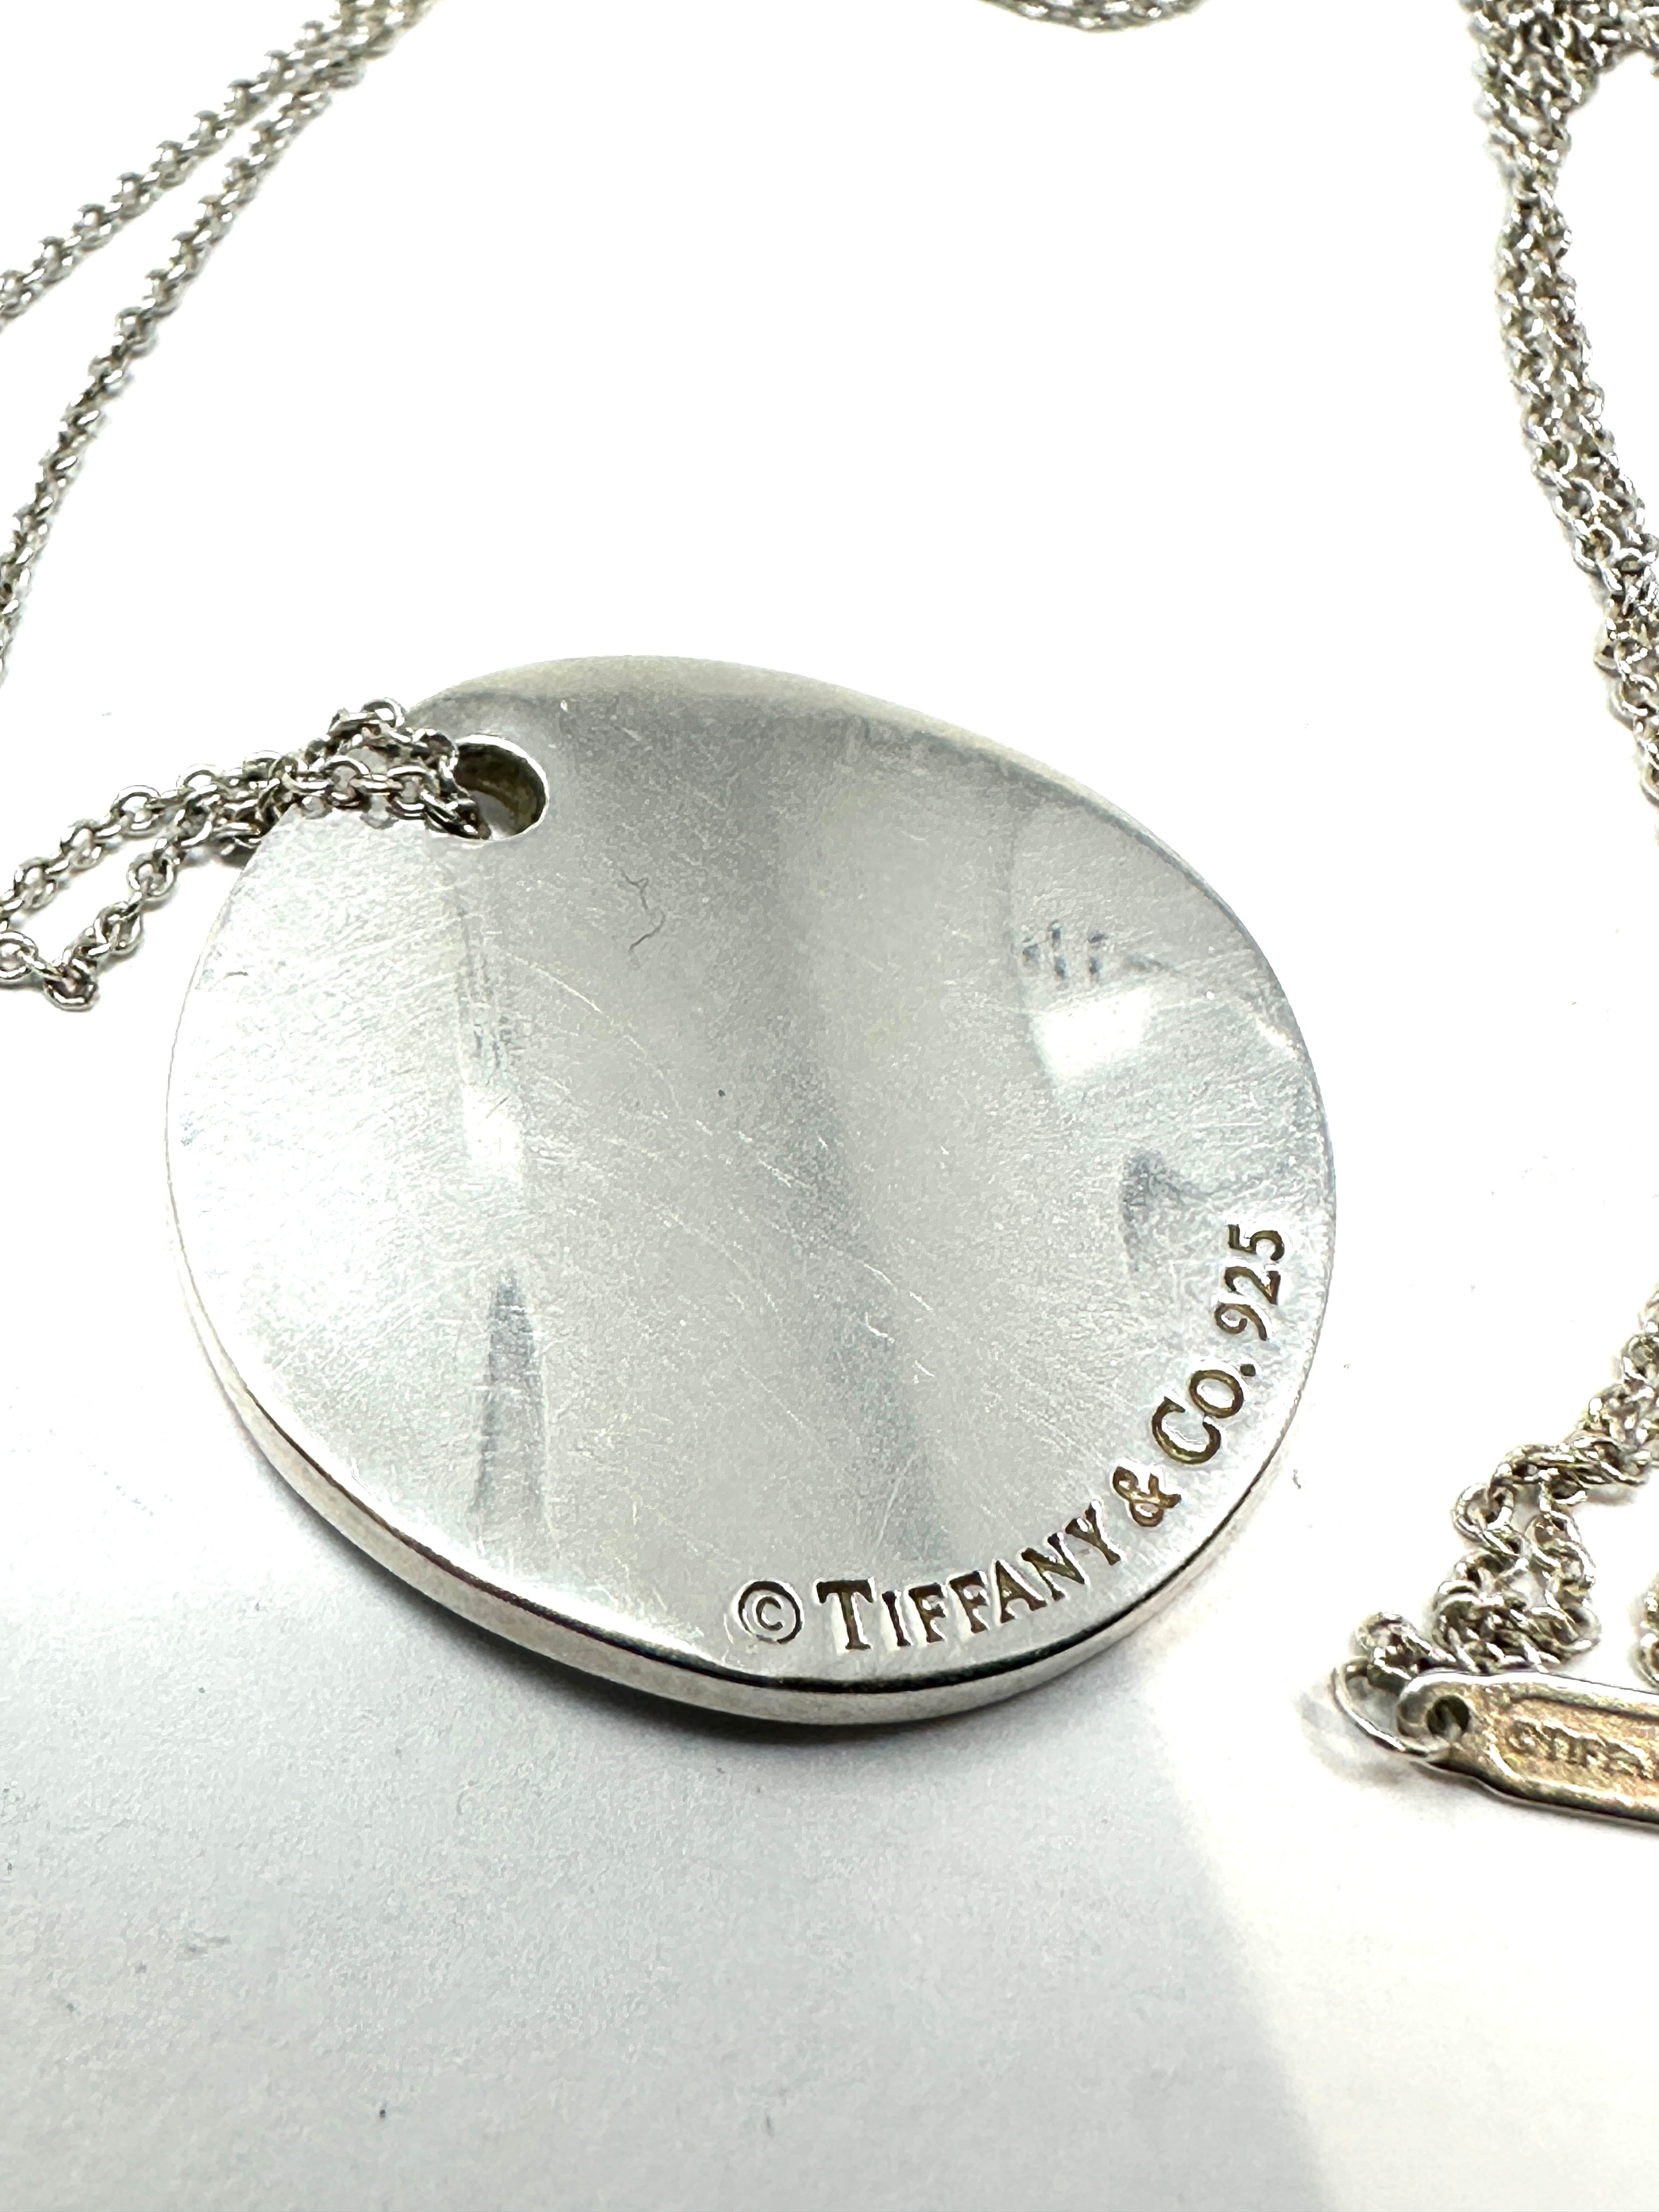 TIFFANY & CO. Notes Round Pendant Necklace - Image 4 of 4